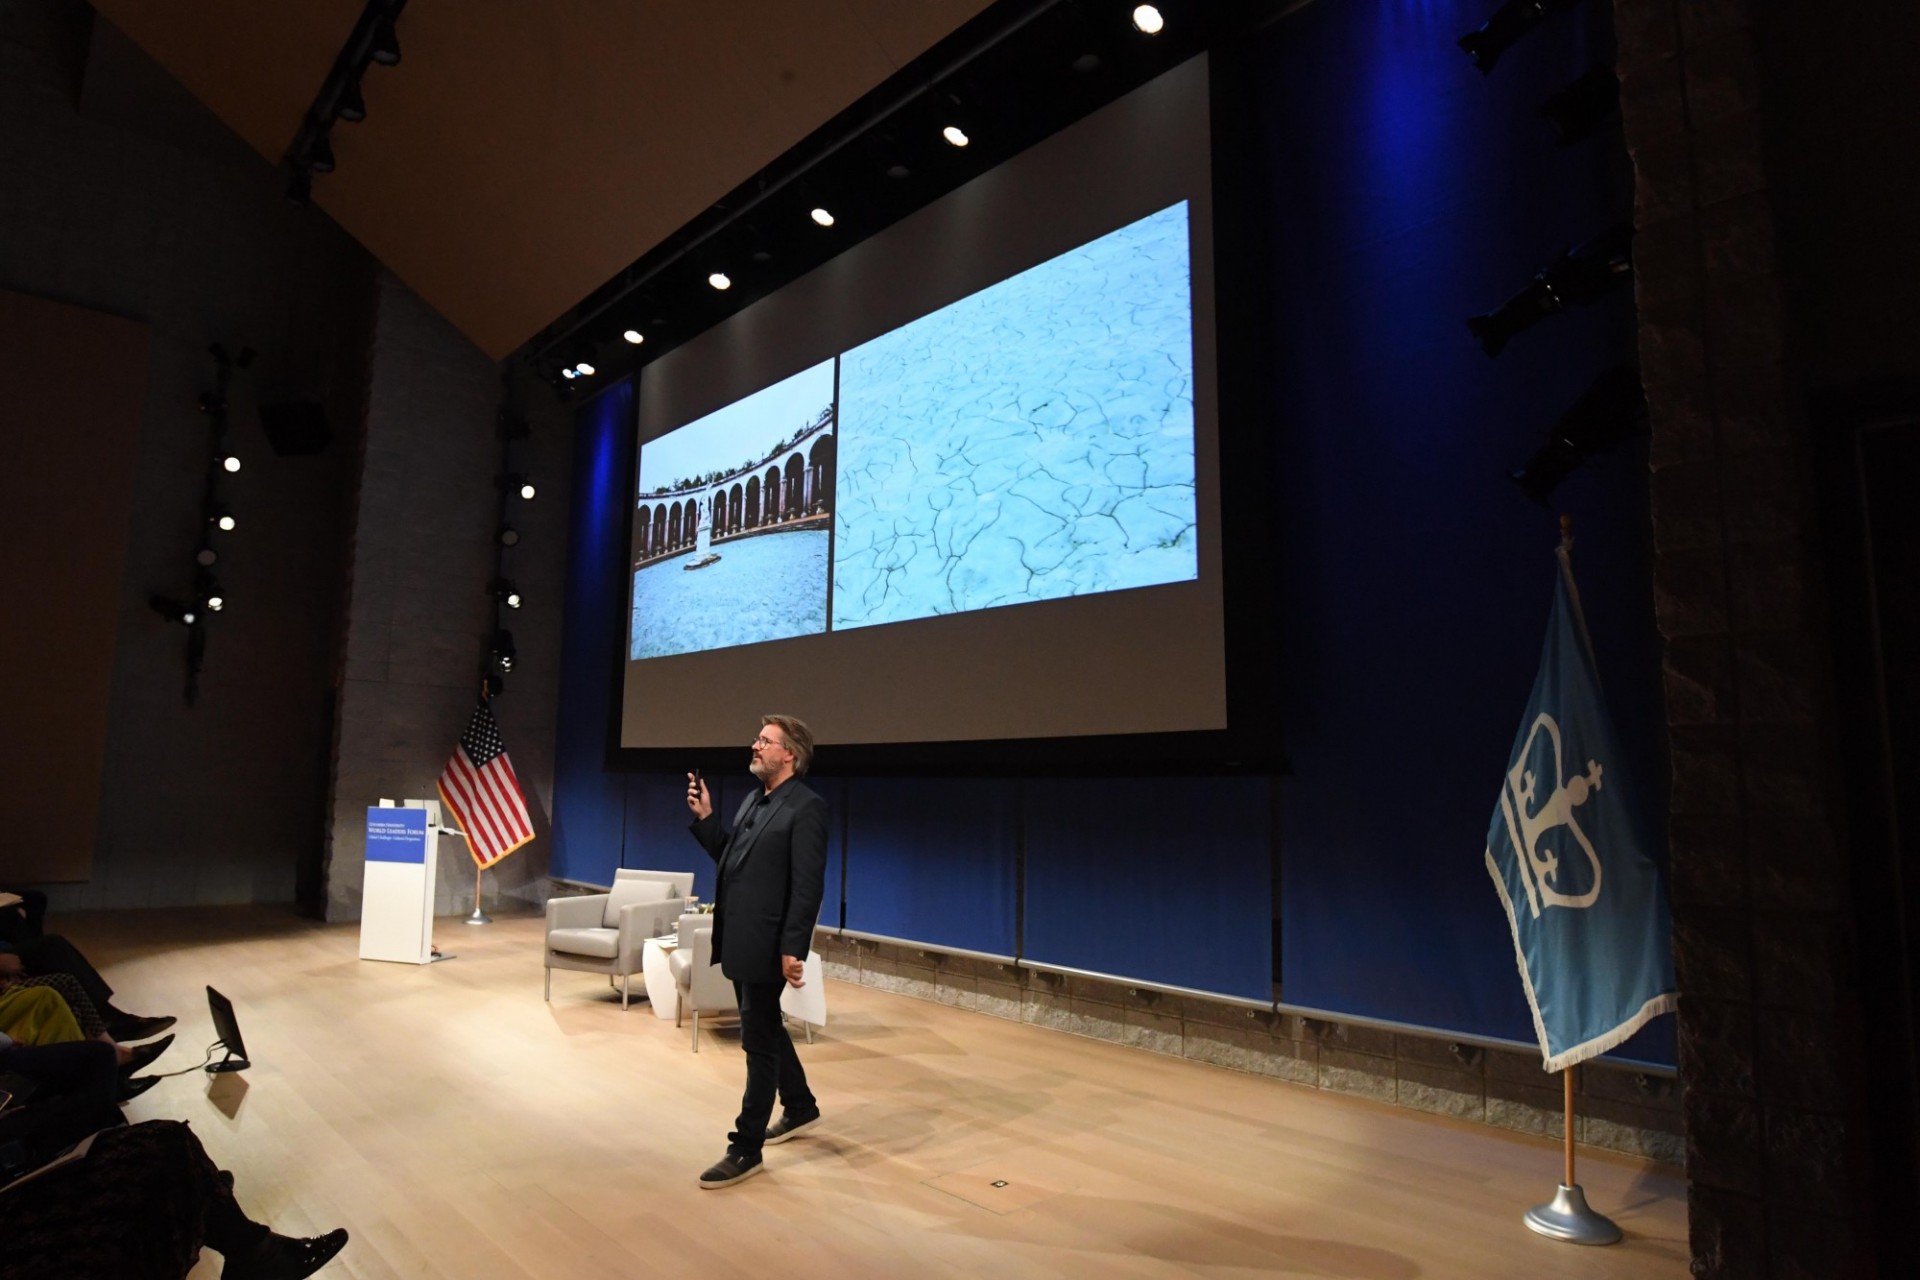 Olafur Eliasson, Multimedia Artist delivers his address to Columbia University students, faculty and staff.